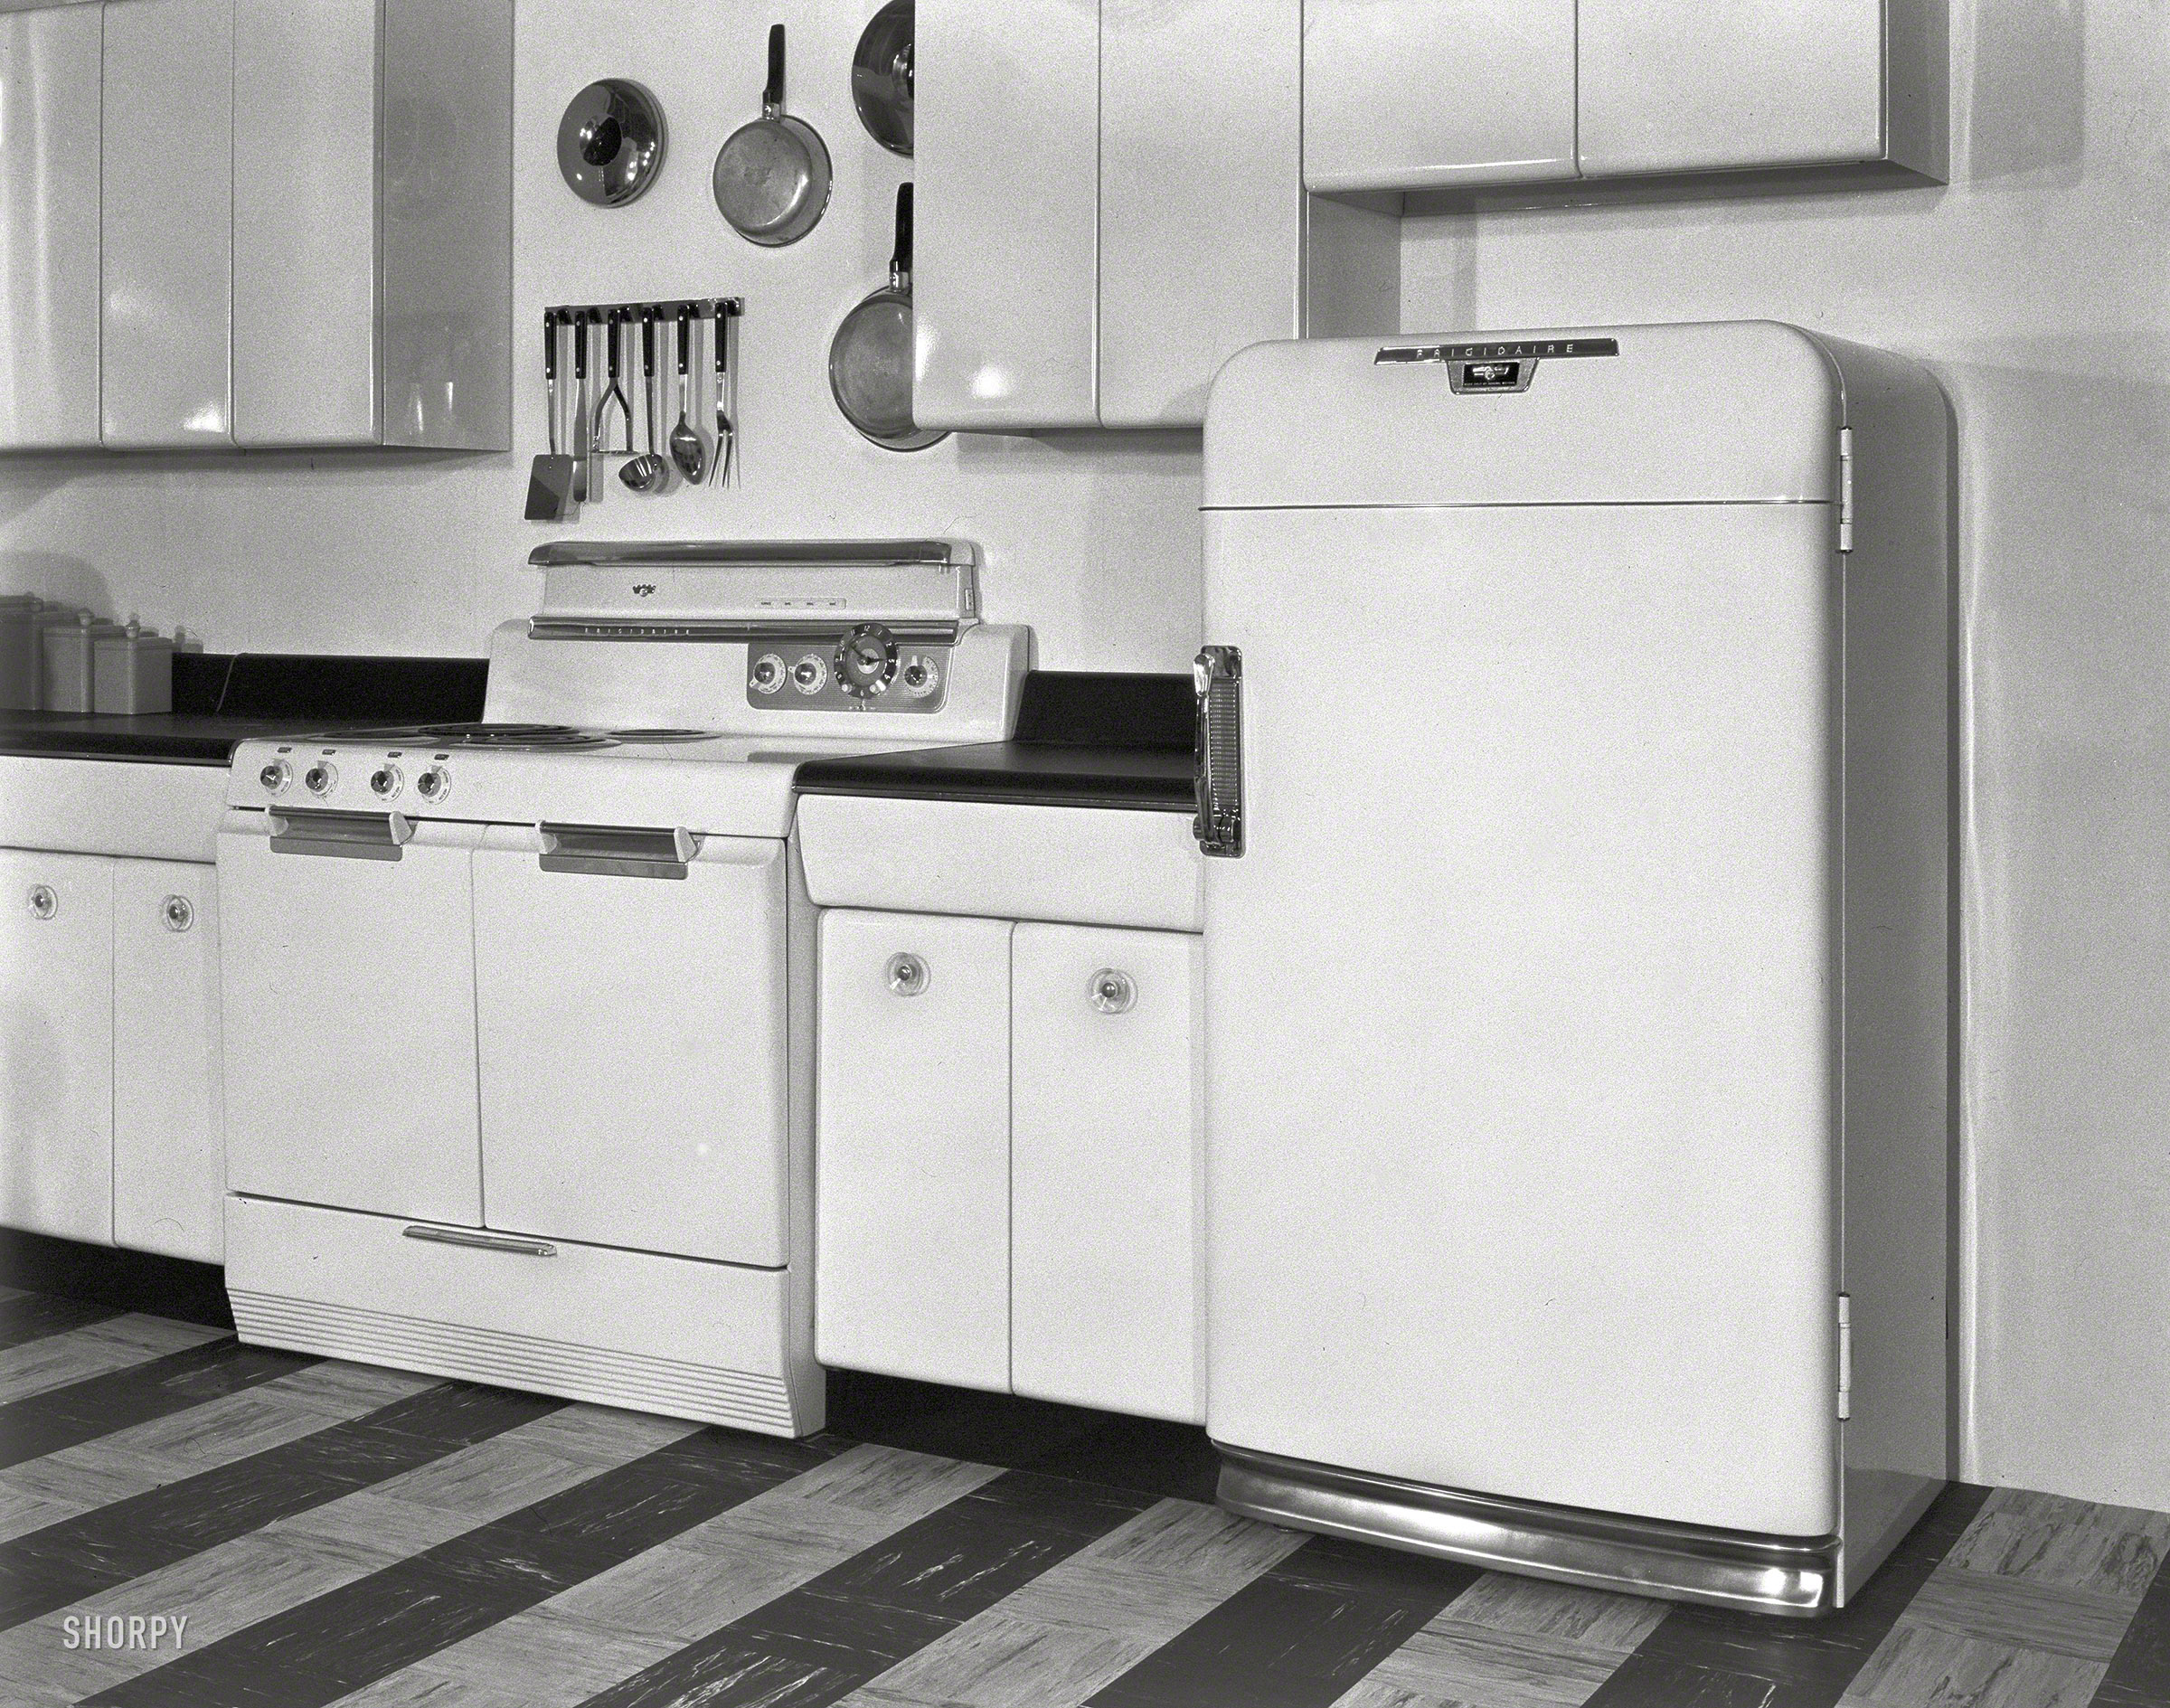 June 1, 1951. "Raymond Loewy Associates, 'Look' kitchen." Which evidently had something to do with Look magazine. Oven-range and refrigerator by Frigidaire. Large-format acetate negative by Gottscho-Schleisner. View full size.